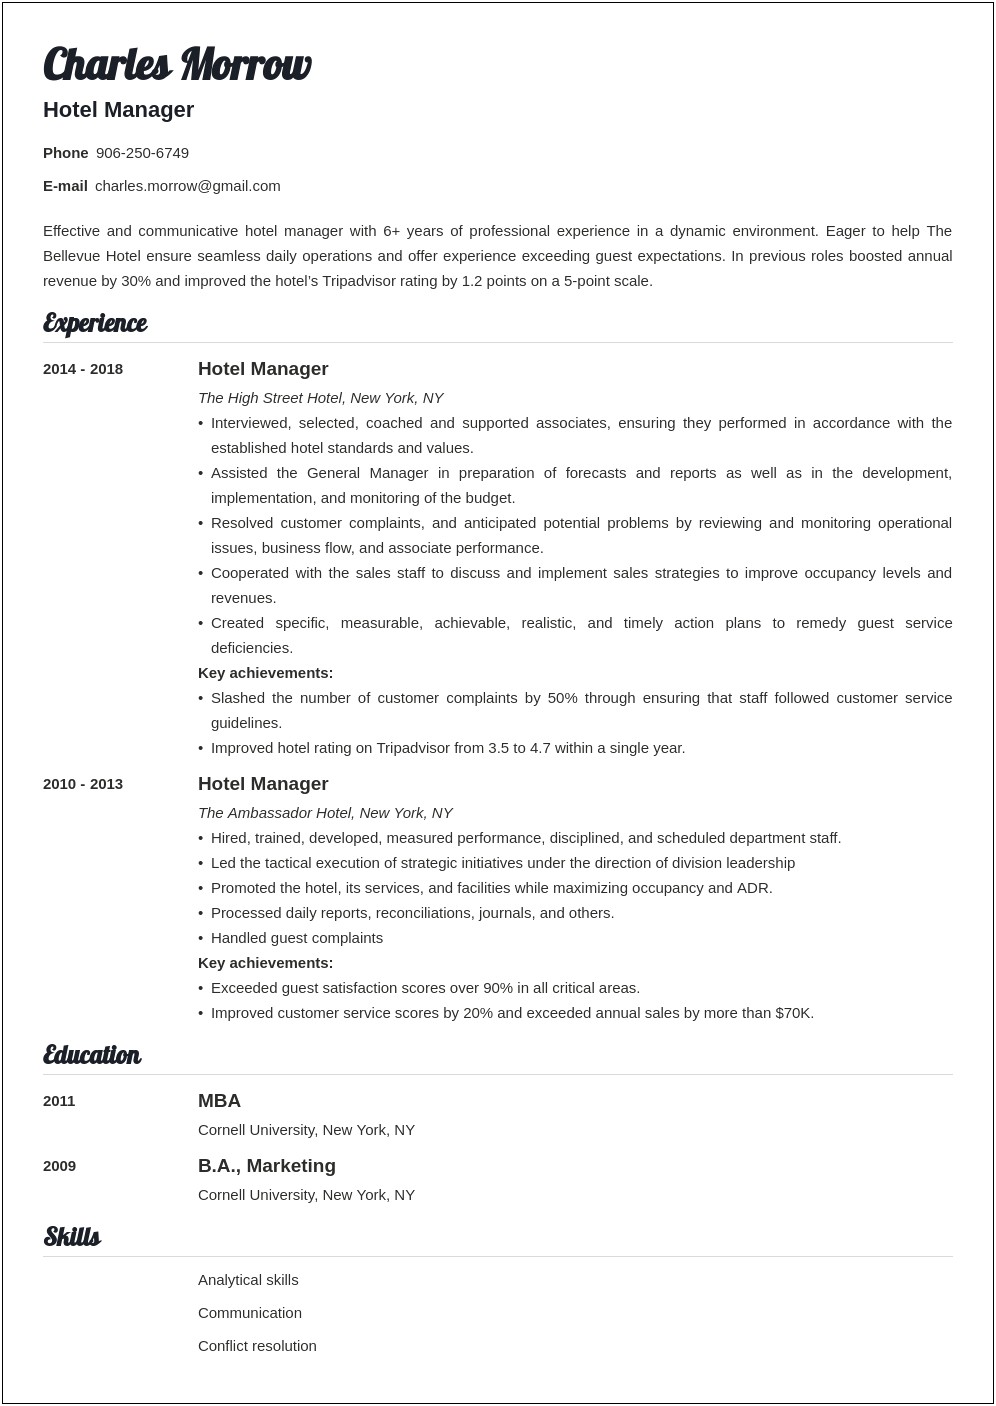 Resume For Hotel Industry Job